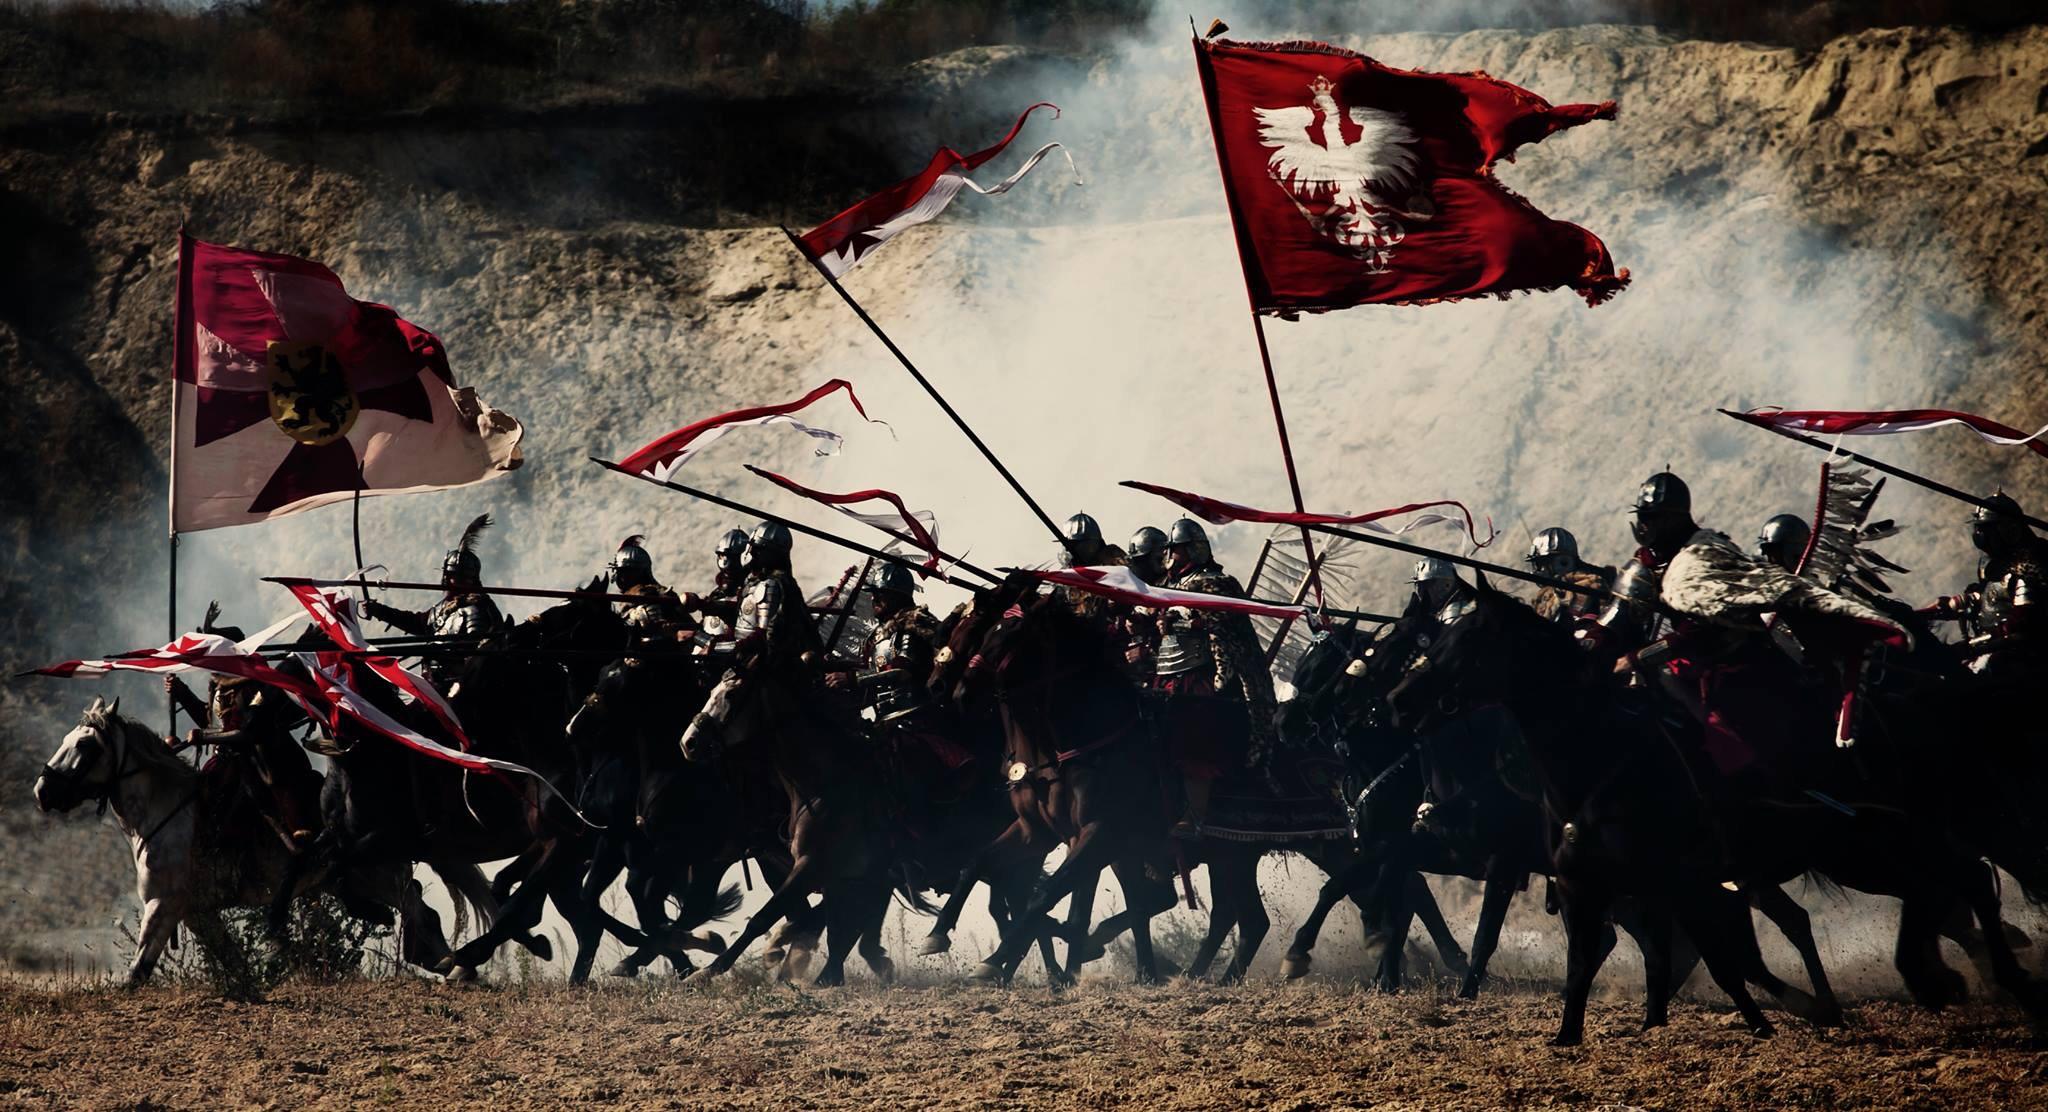 Then the Winged Hussars arrived